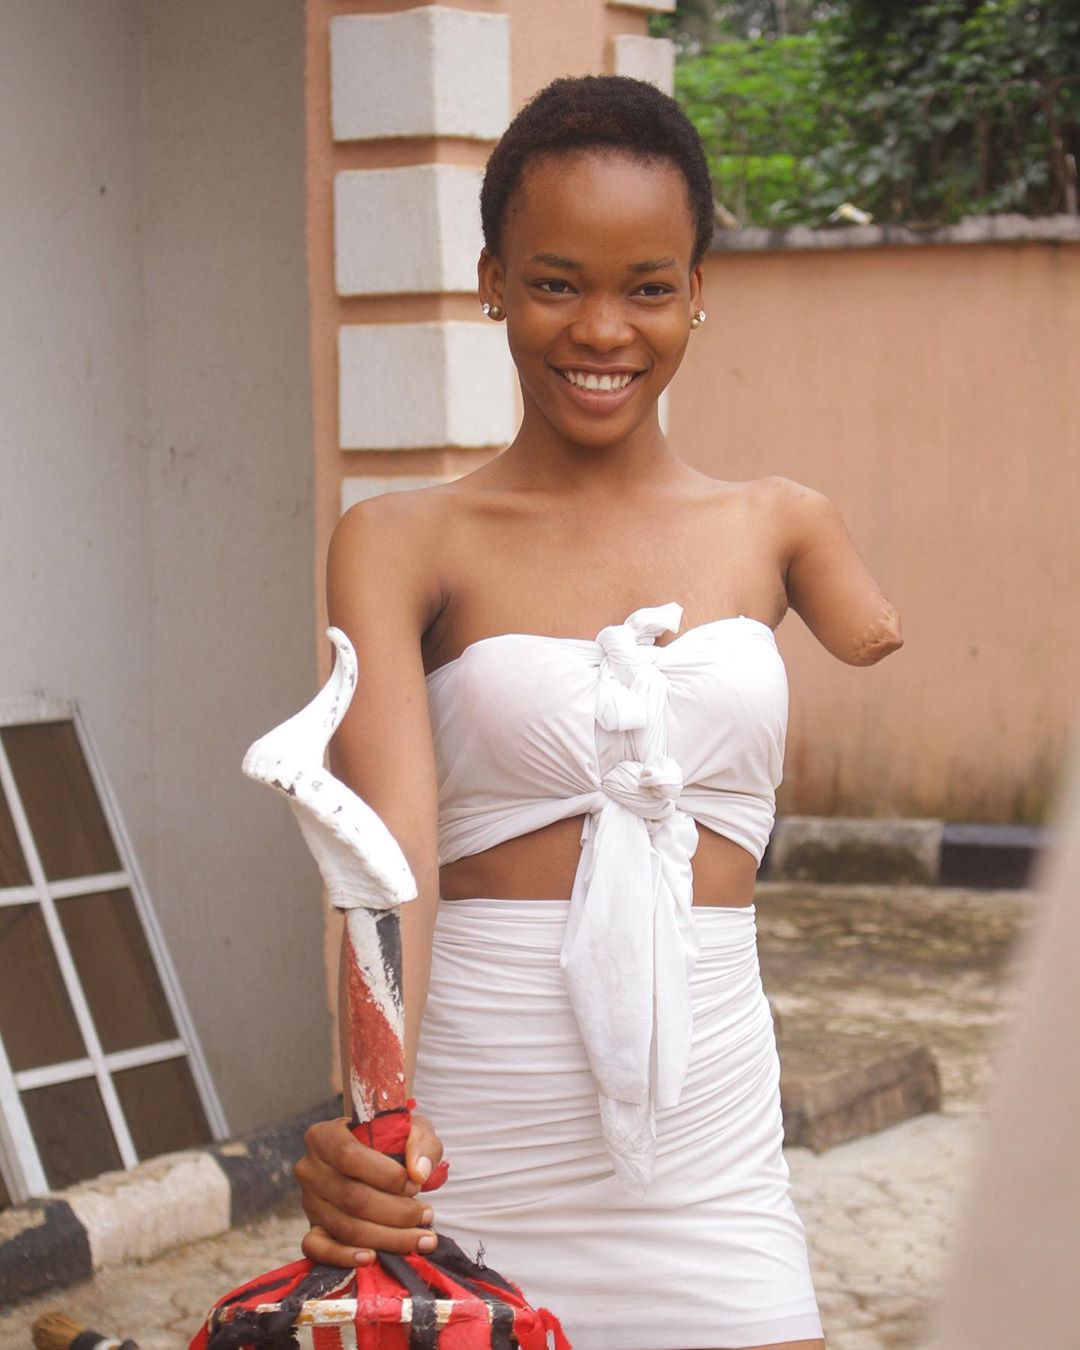 Beauty Chidinma Opurum Biography, Age, Instagram, Husband, Accident Story, Movies, Family ...